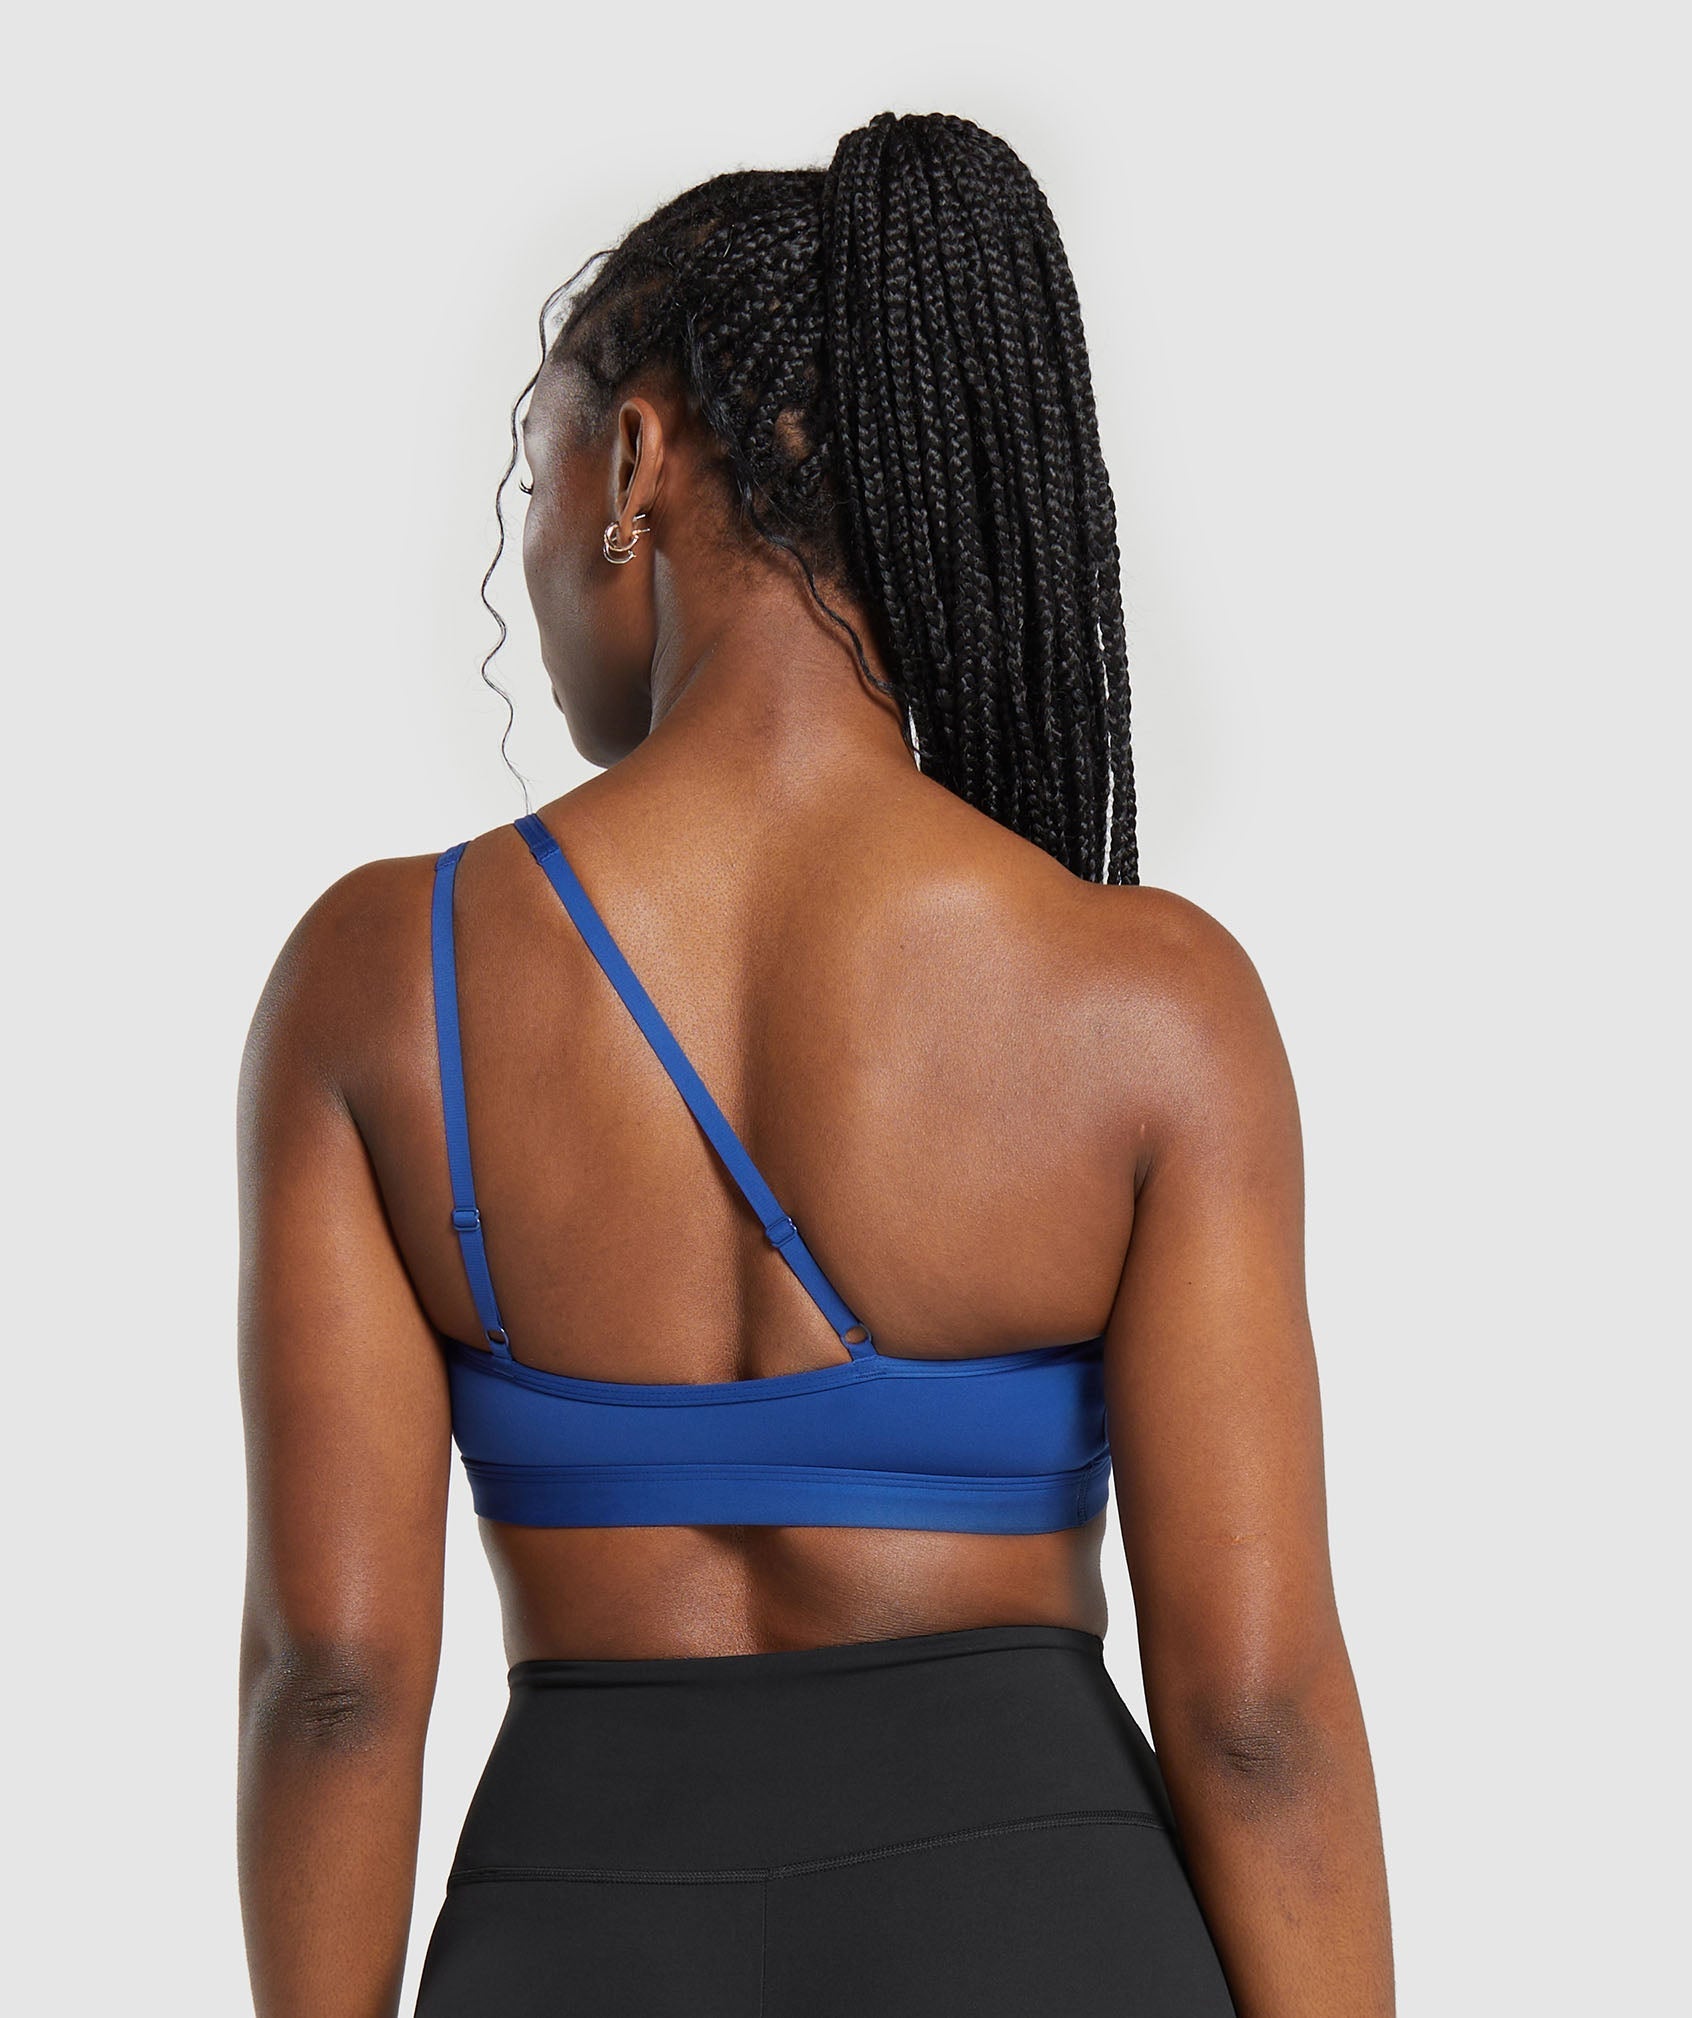 Girls See Price in Bag Blue Sports Bras.